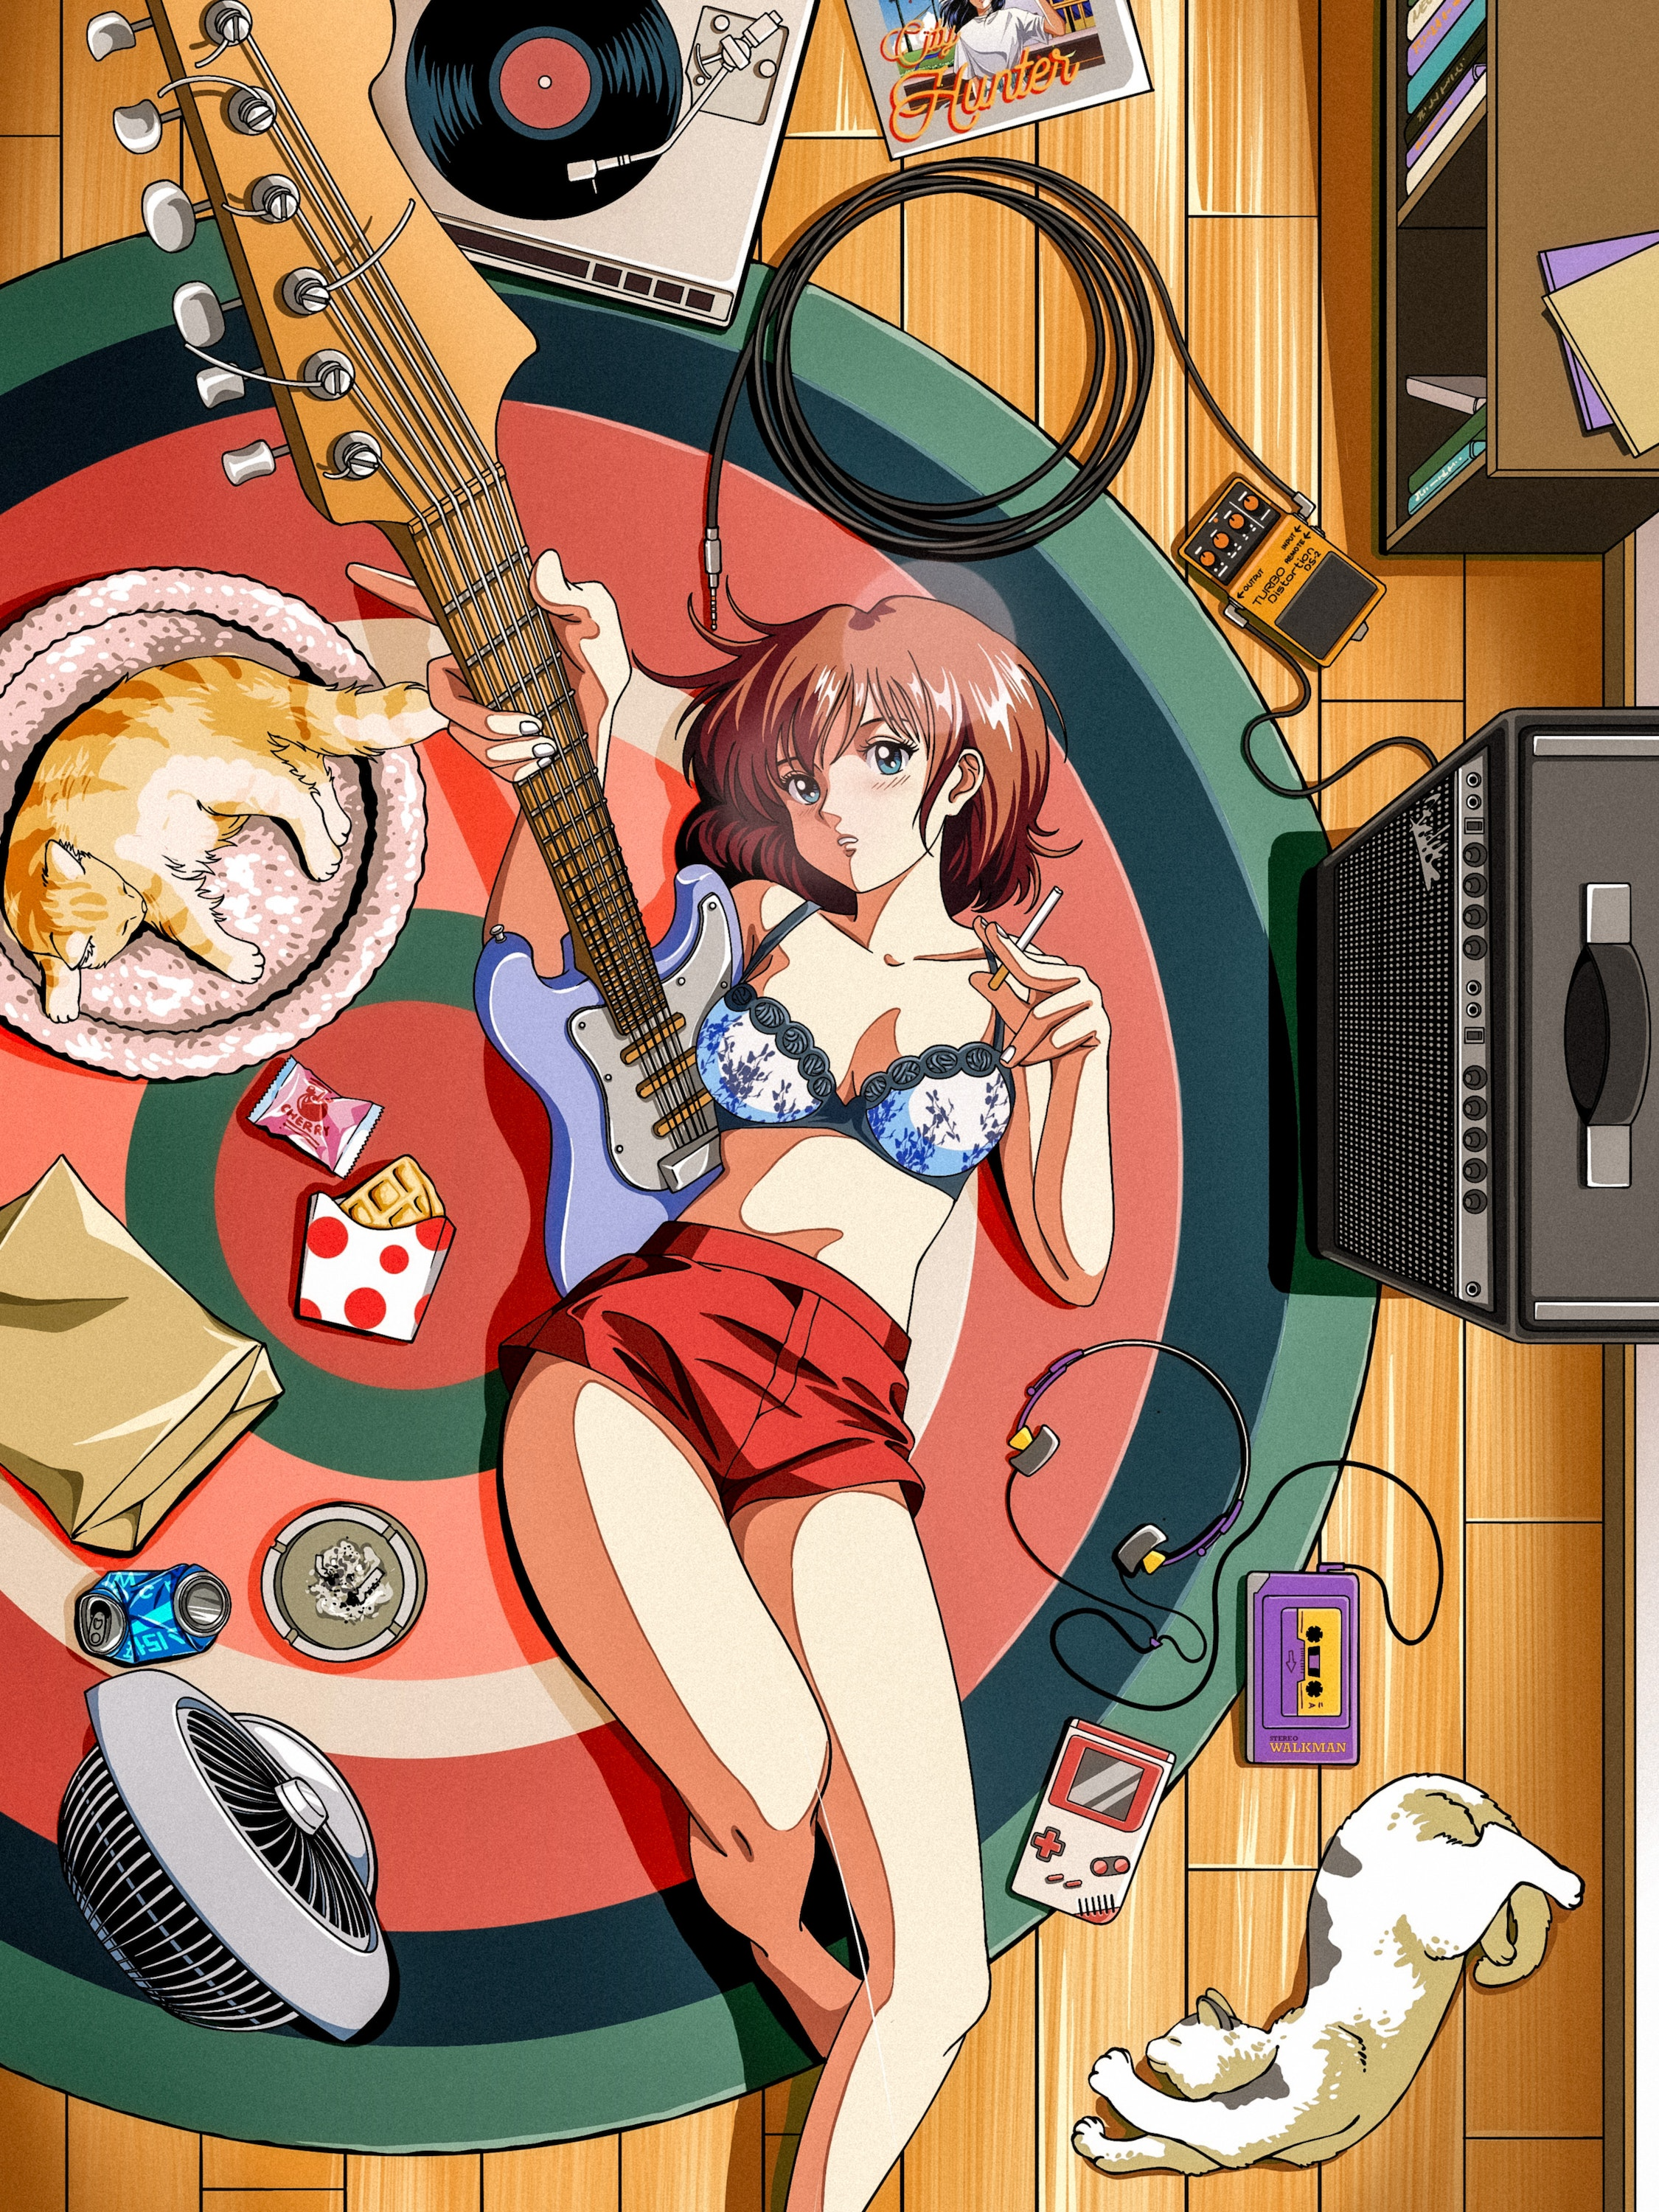 Anime 2250x3000 Septa Abdi digital art artwork illustration anime anime girls lying down cats animals guitar redhead bra looking at viewer cigarettes lying on back thighs portrait display fans discs cassette can musical instrument